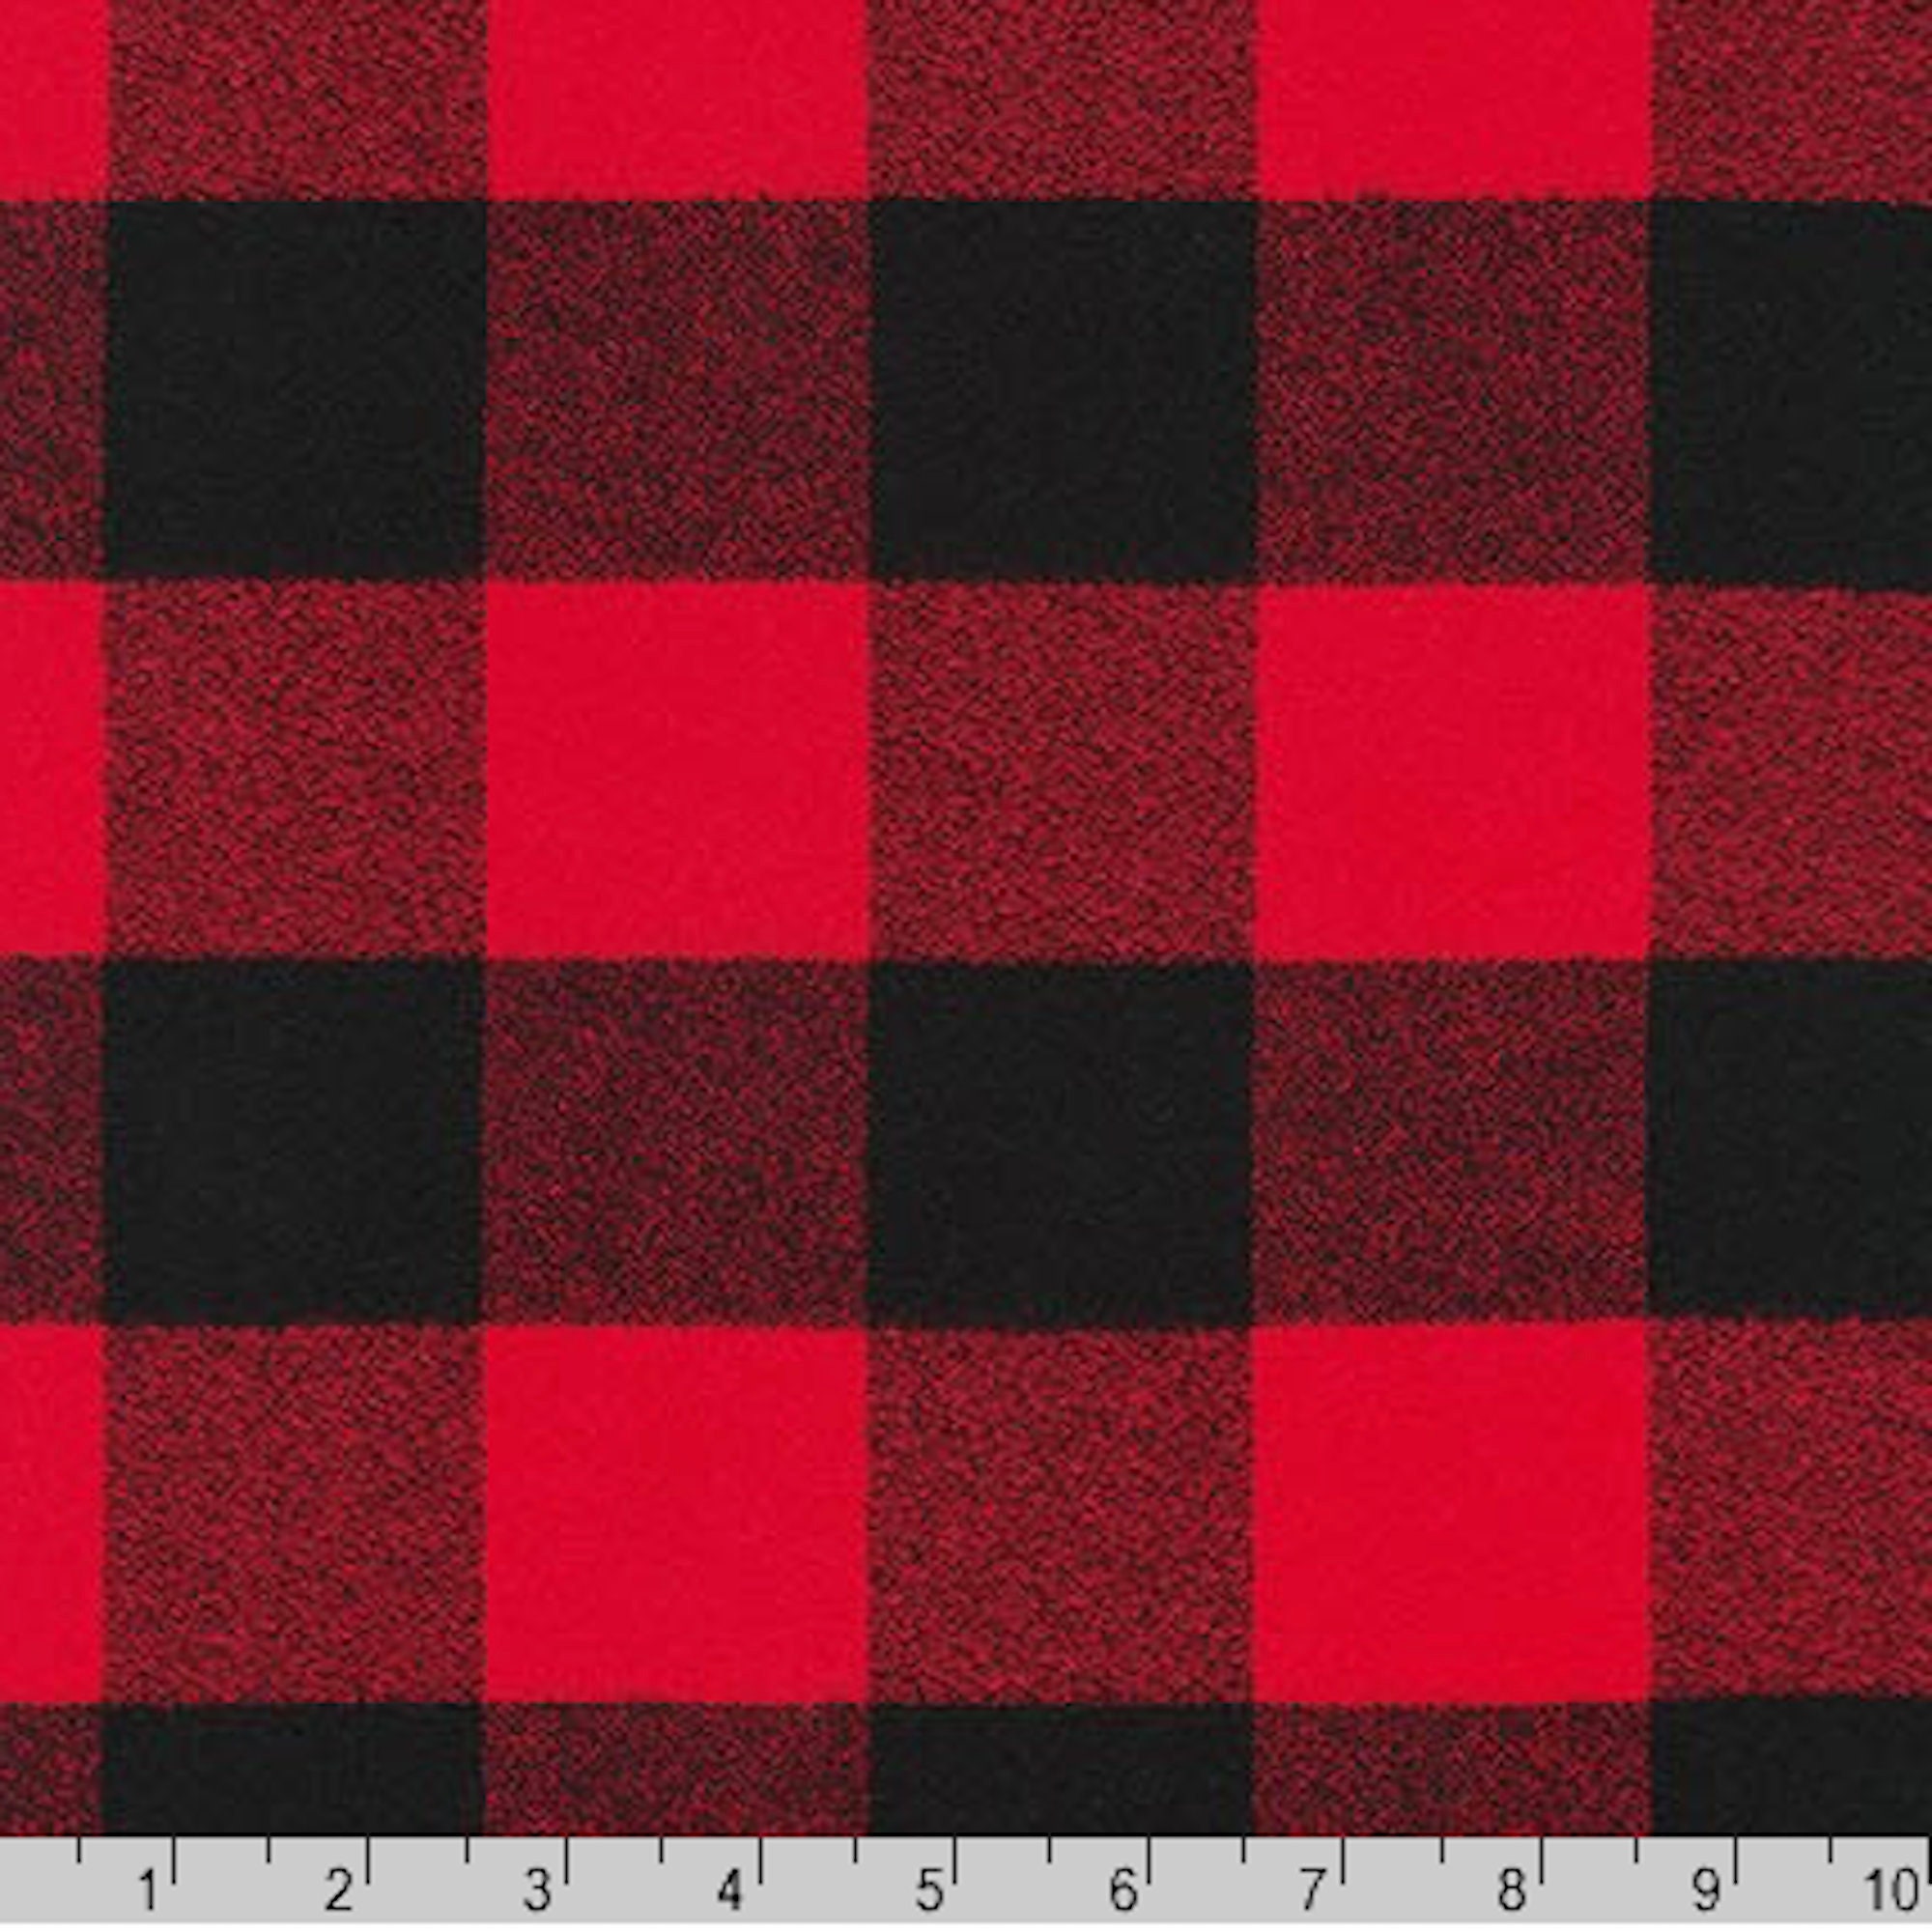 Red & Black Buffalo Check Flannel Fabric By The Yard or Half Yards 100% Brushed Cotton Winter Christmas Holidays Plaid By David Textiles